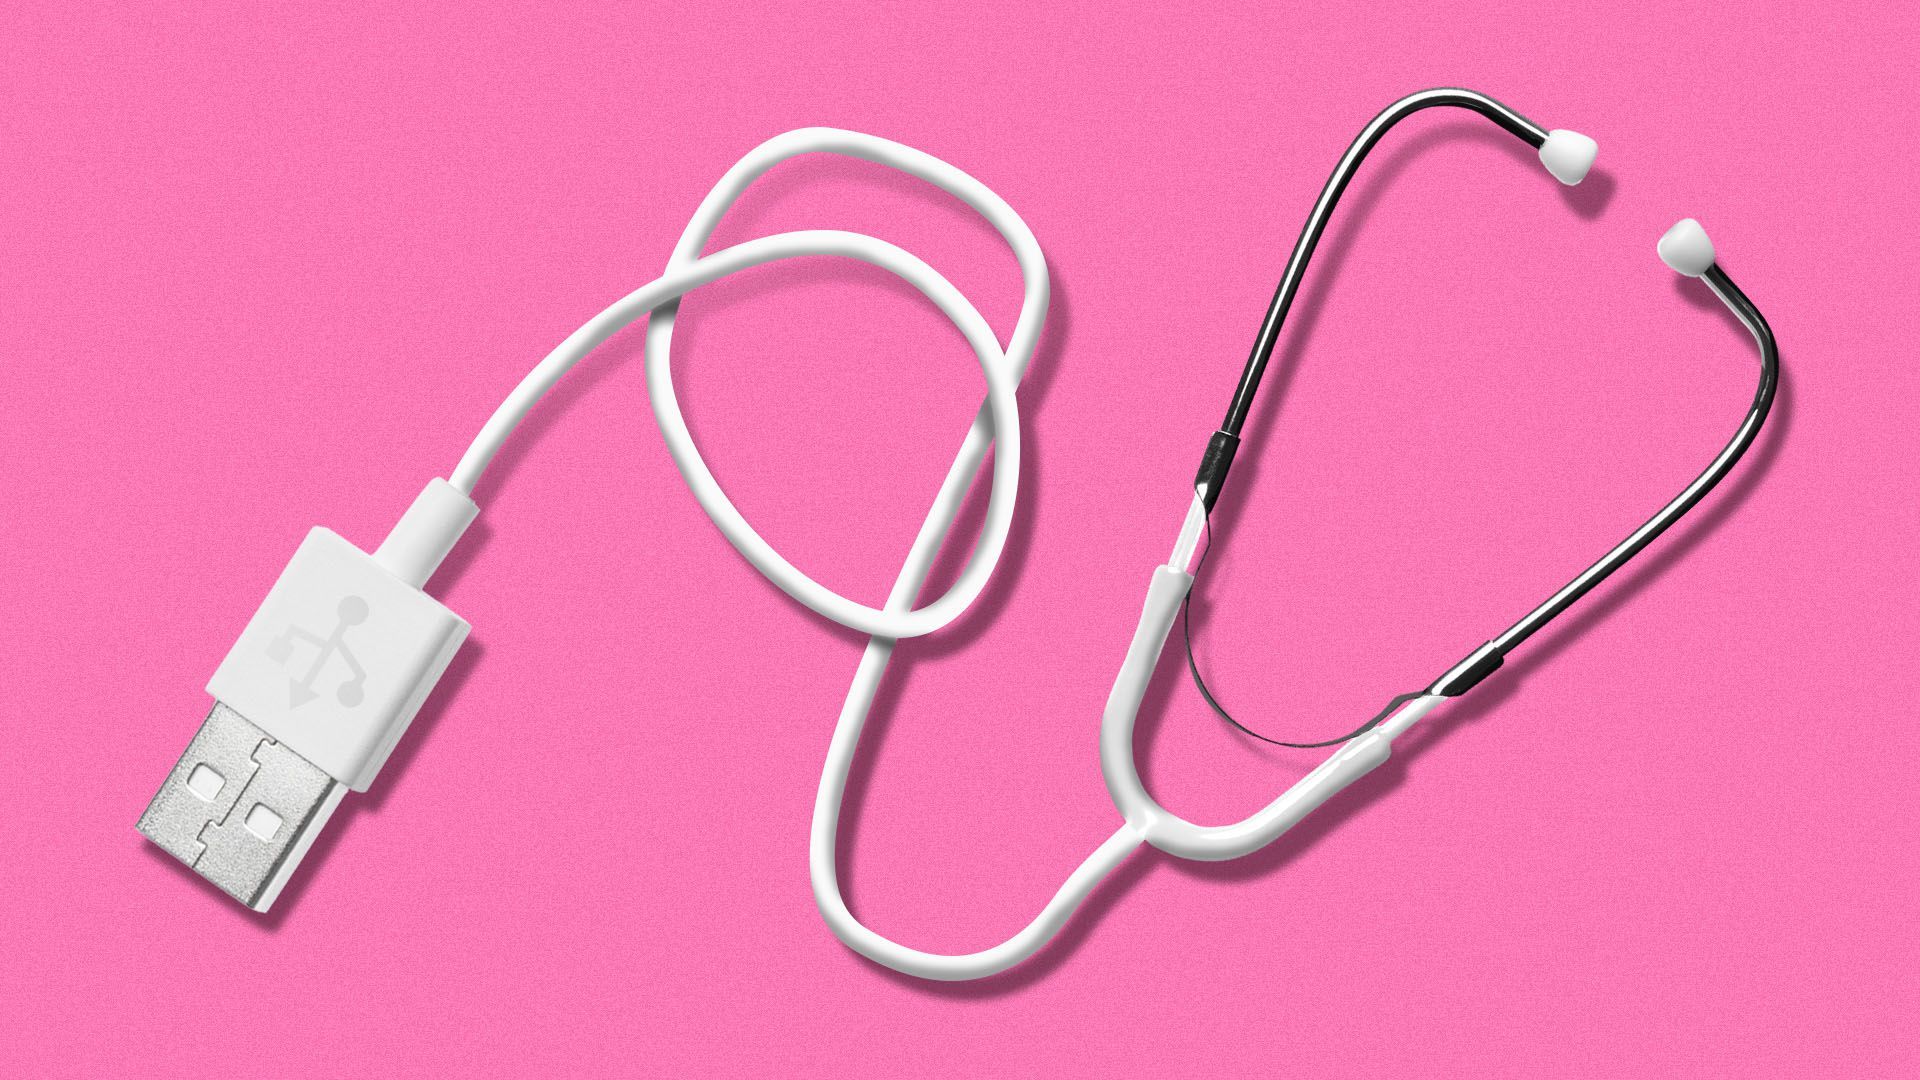 In this illustration, a stethoscope becomes a USB outlet